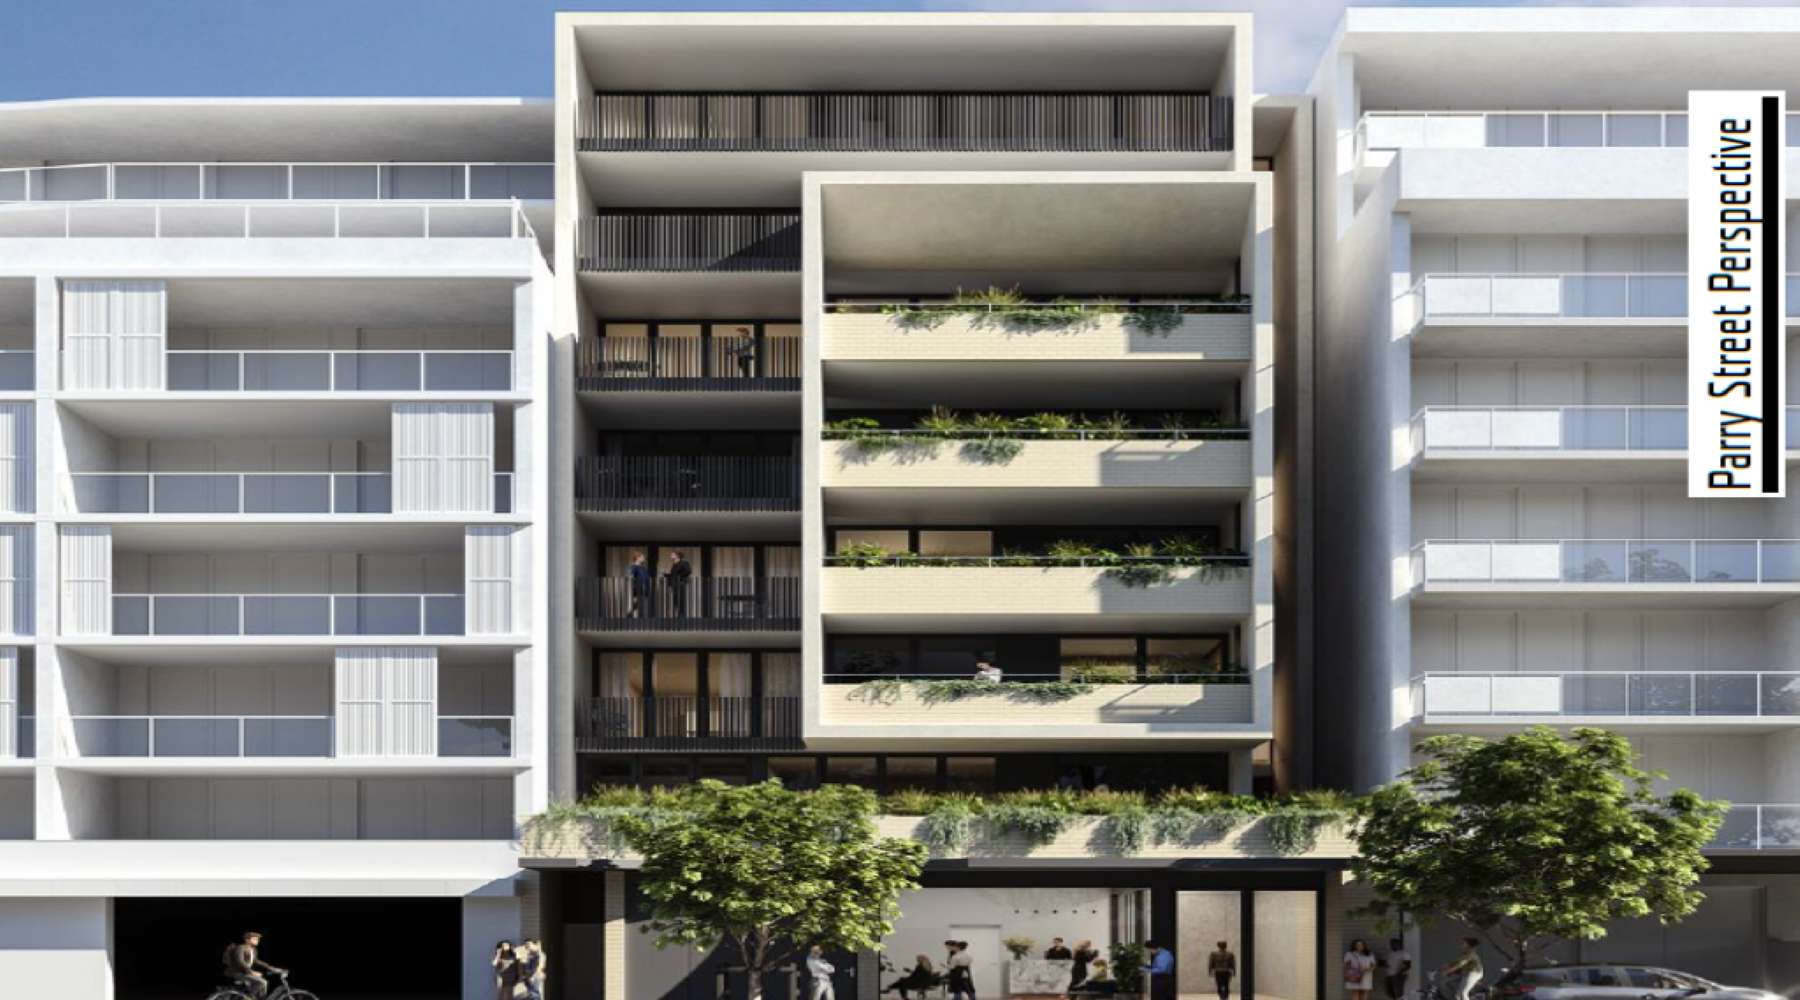 Approval for Parry Street!